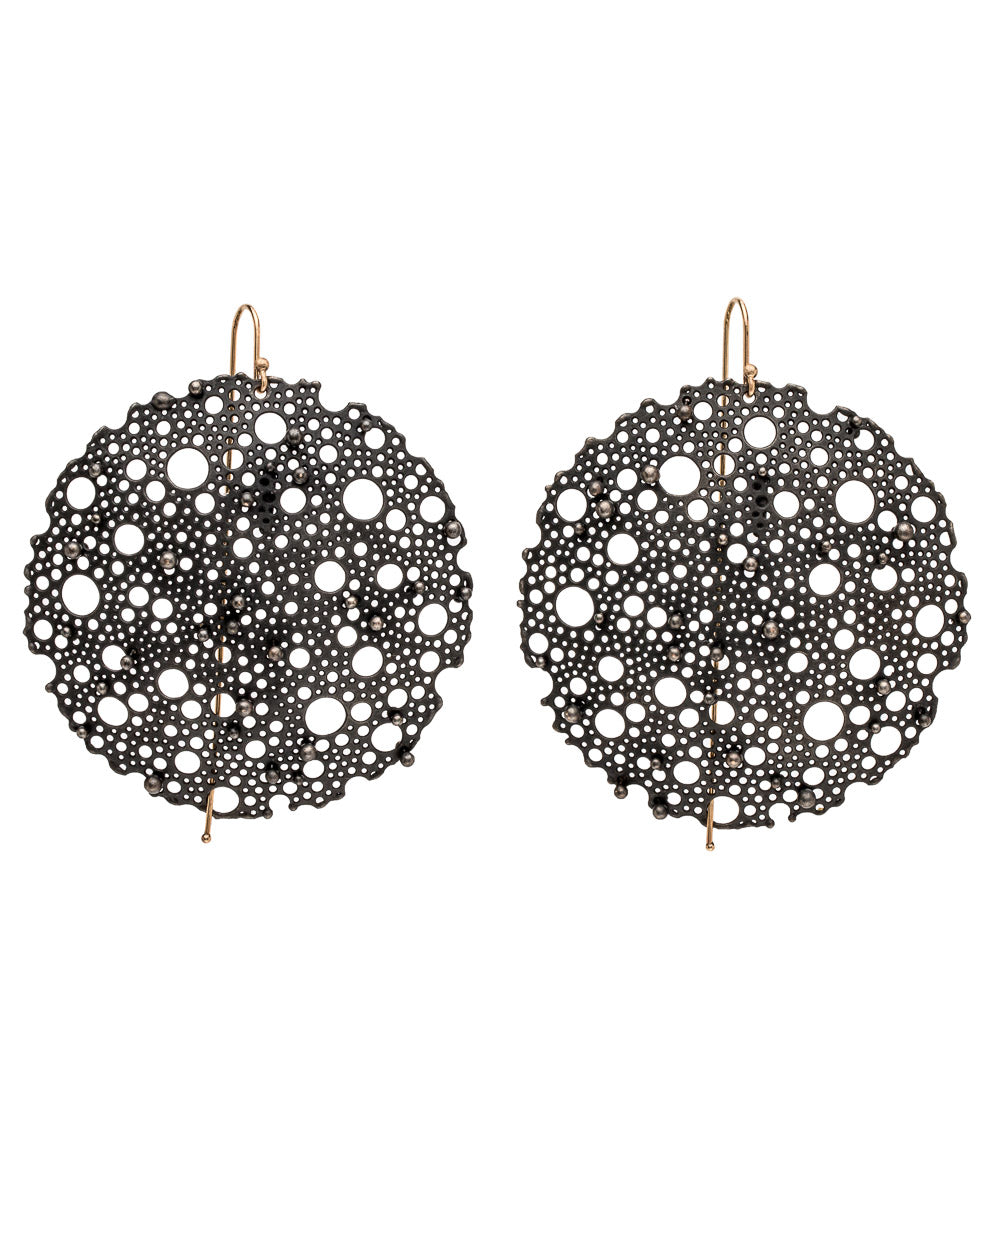 Oxidized Small Queen Anne Lace Earrings